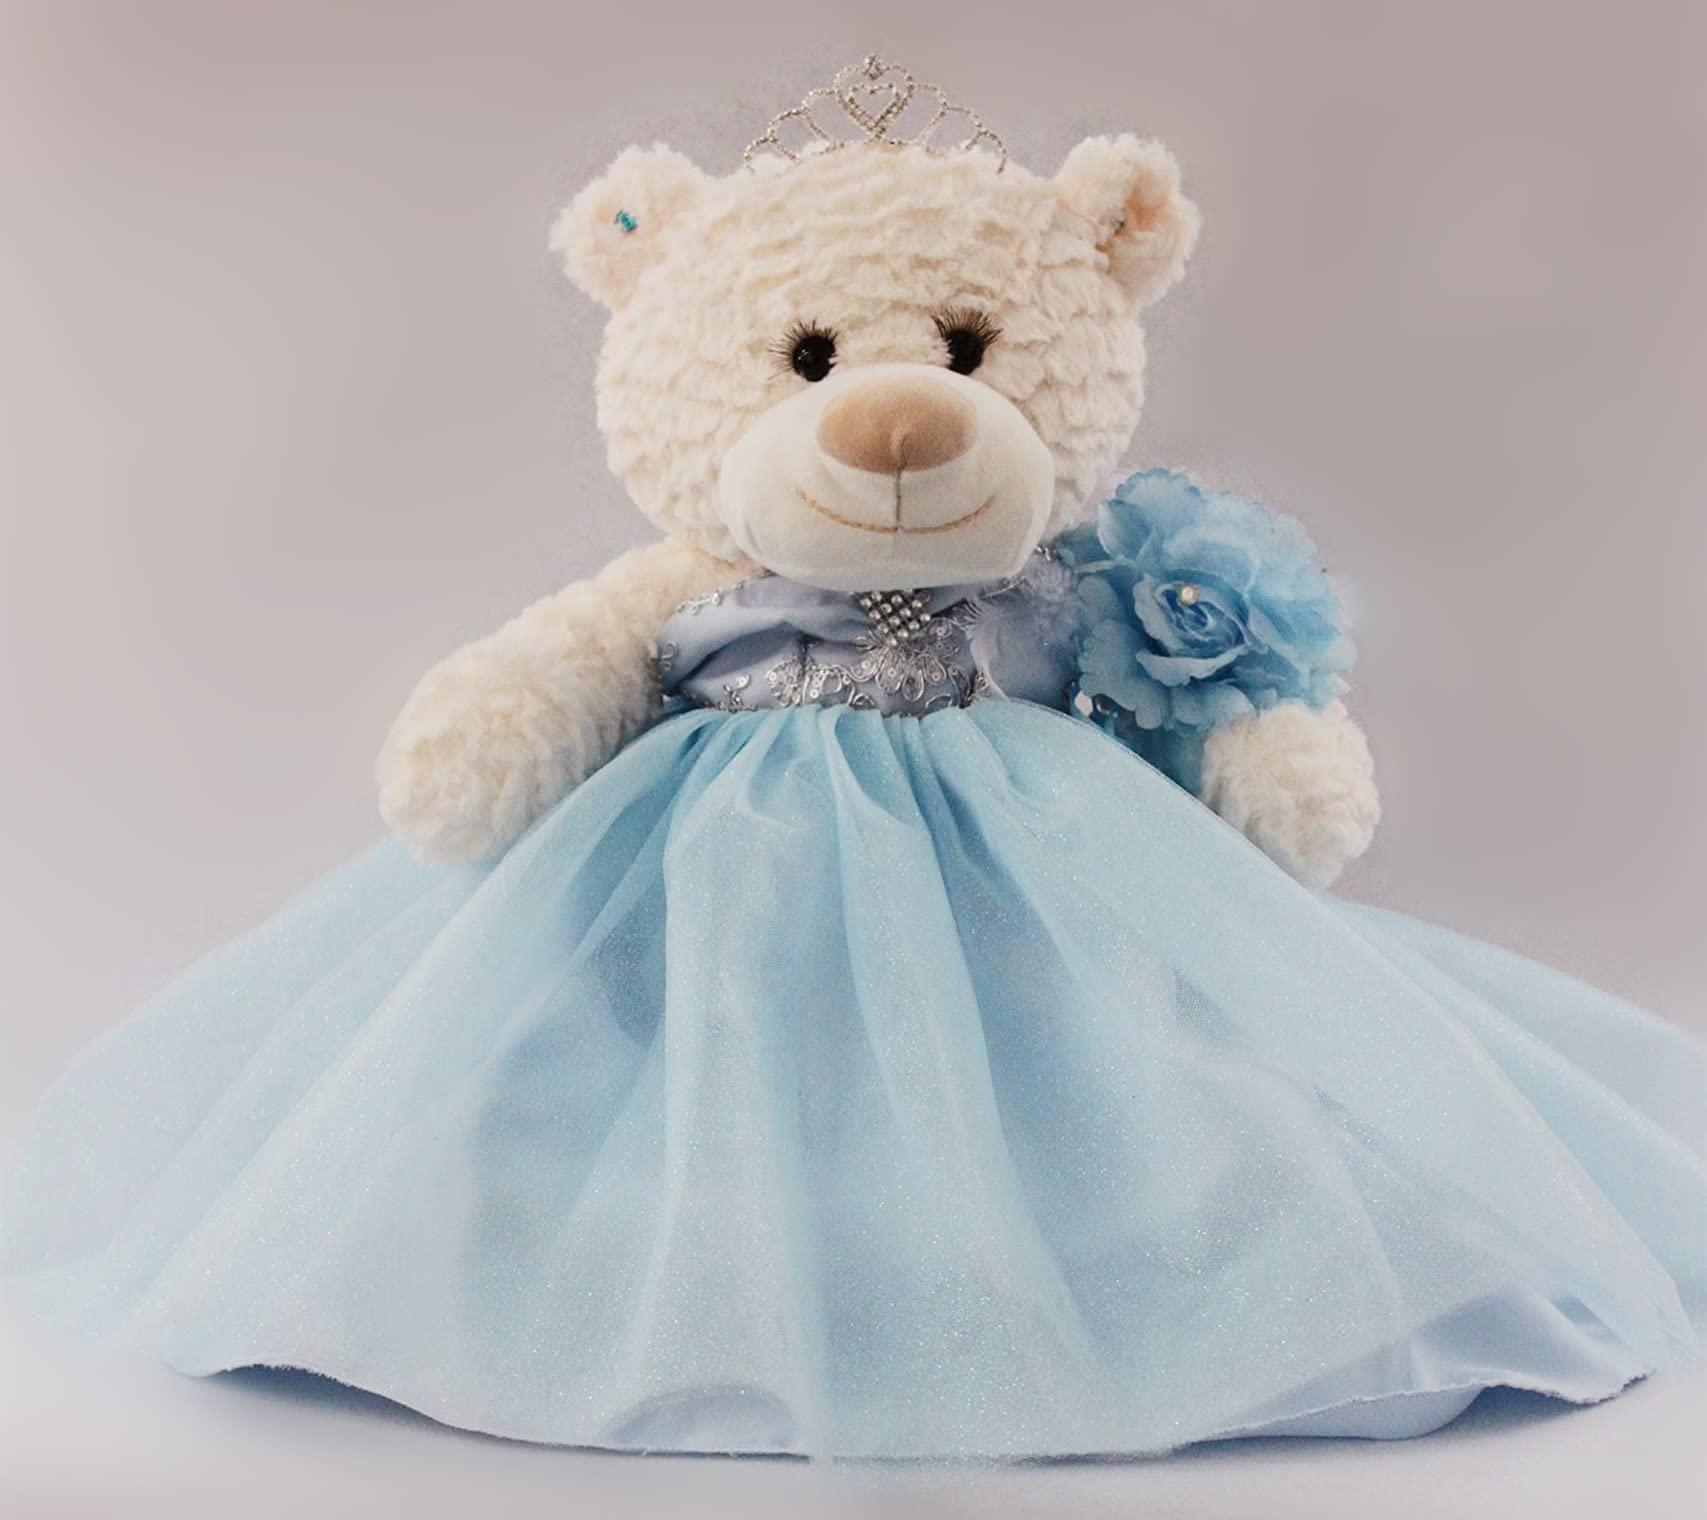 kinnex collections by amanda 20 quince anos quinceanera last doll teddy bear with dress (centerpiece) ~ b16631-4 baby blue 16